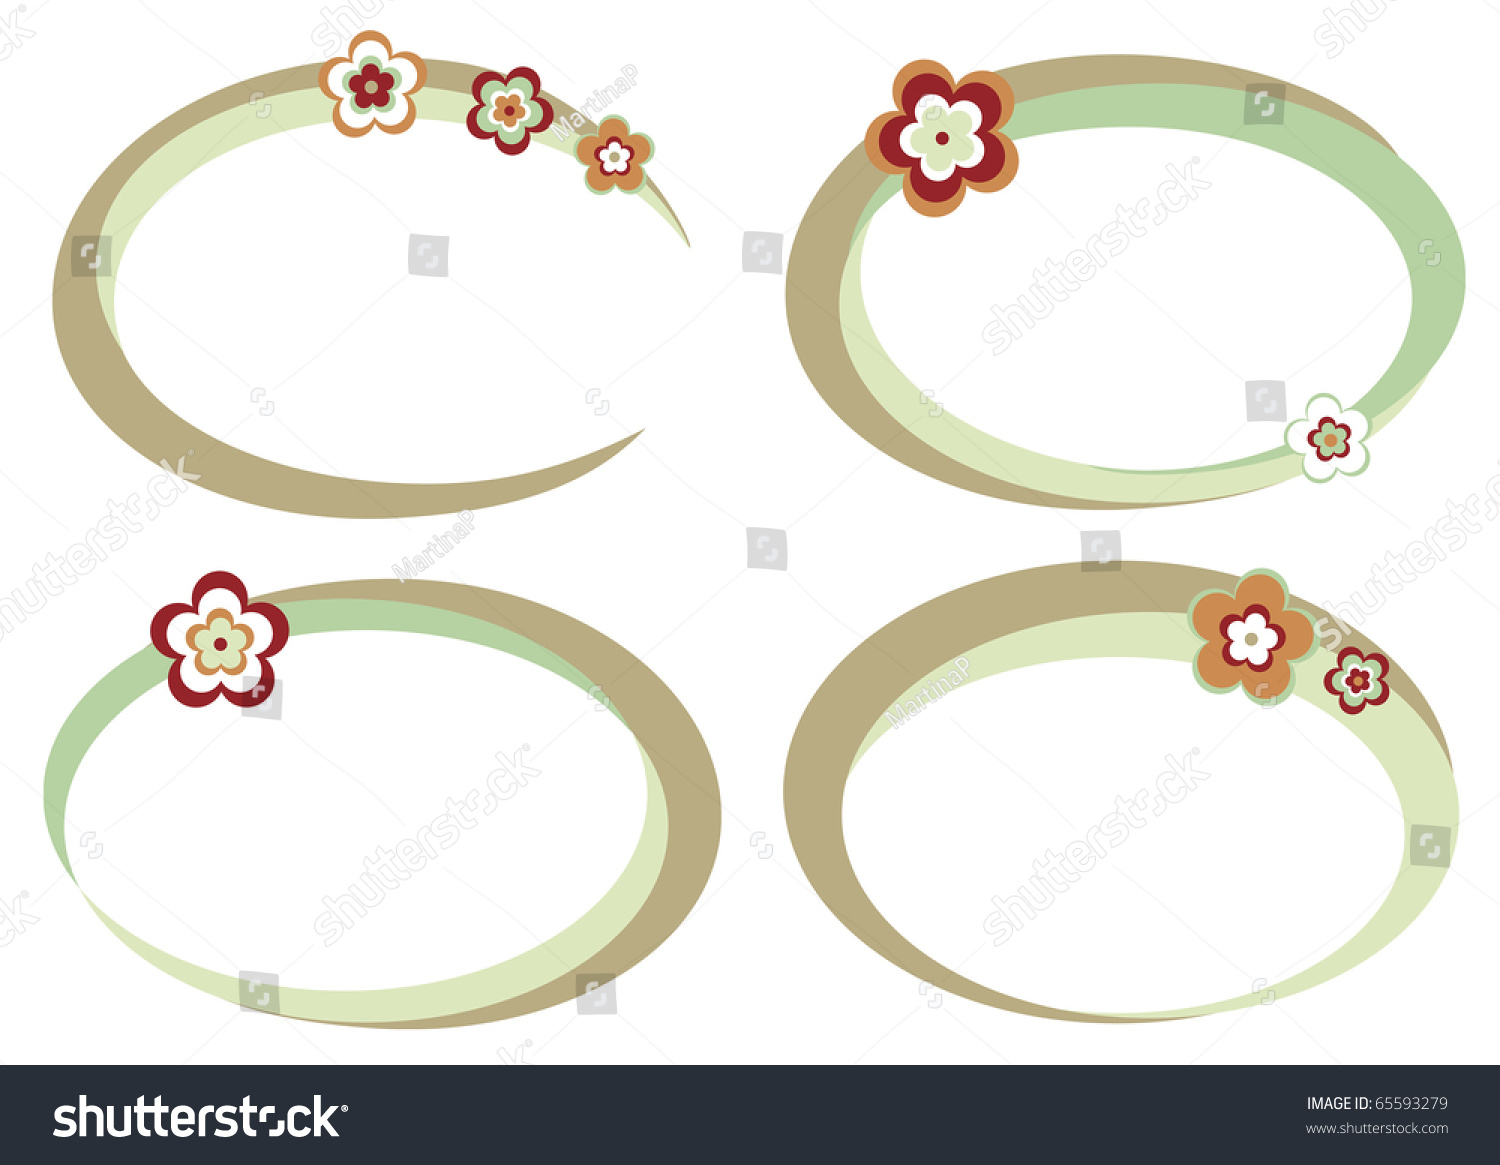 Set Of Frames With Flowers Stock Vector Illustration 65593279